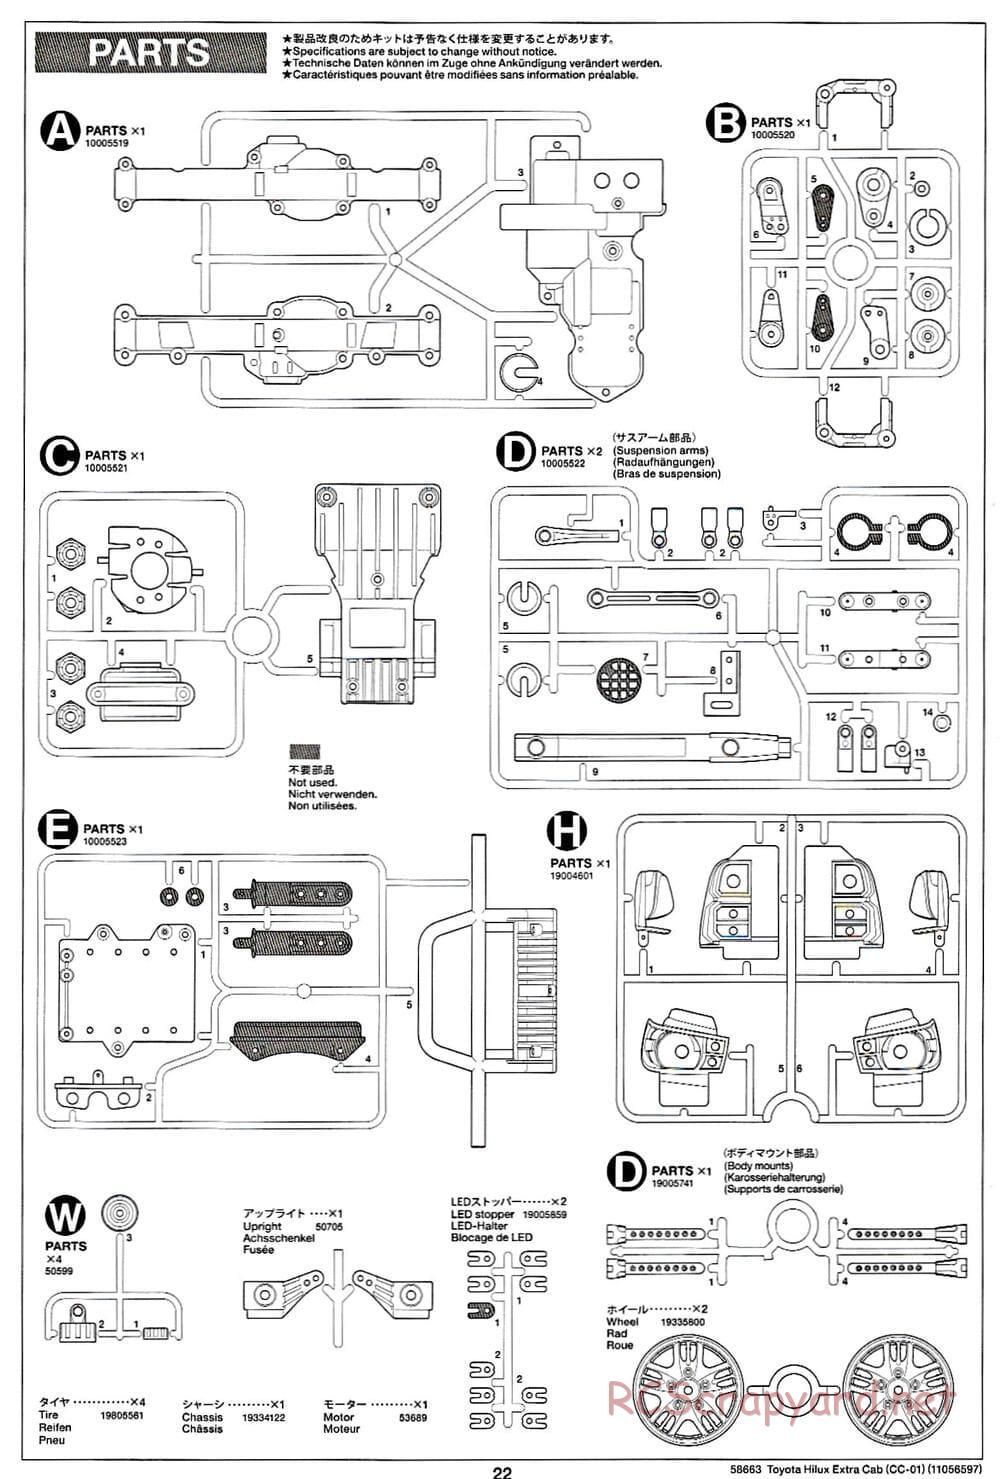 Tamiya - Toyota Hilux Extra Cab - CC-01 Chassis - Manual - Page 22